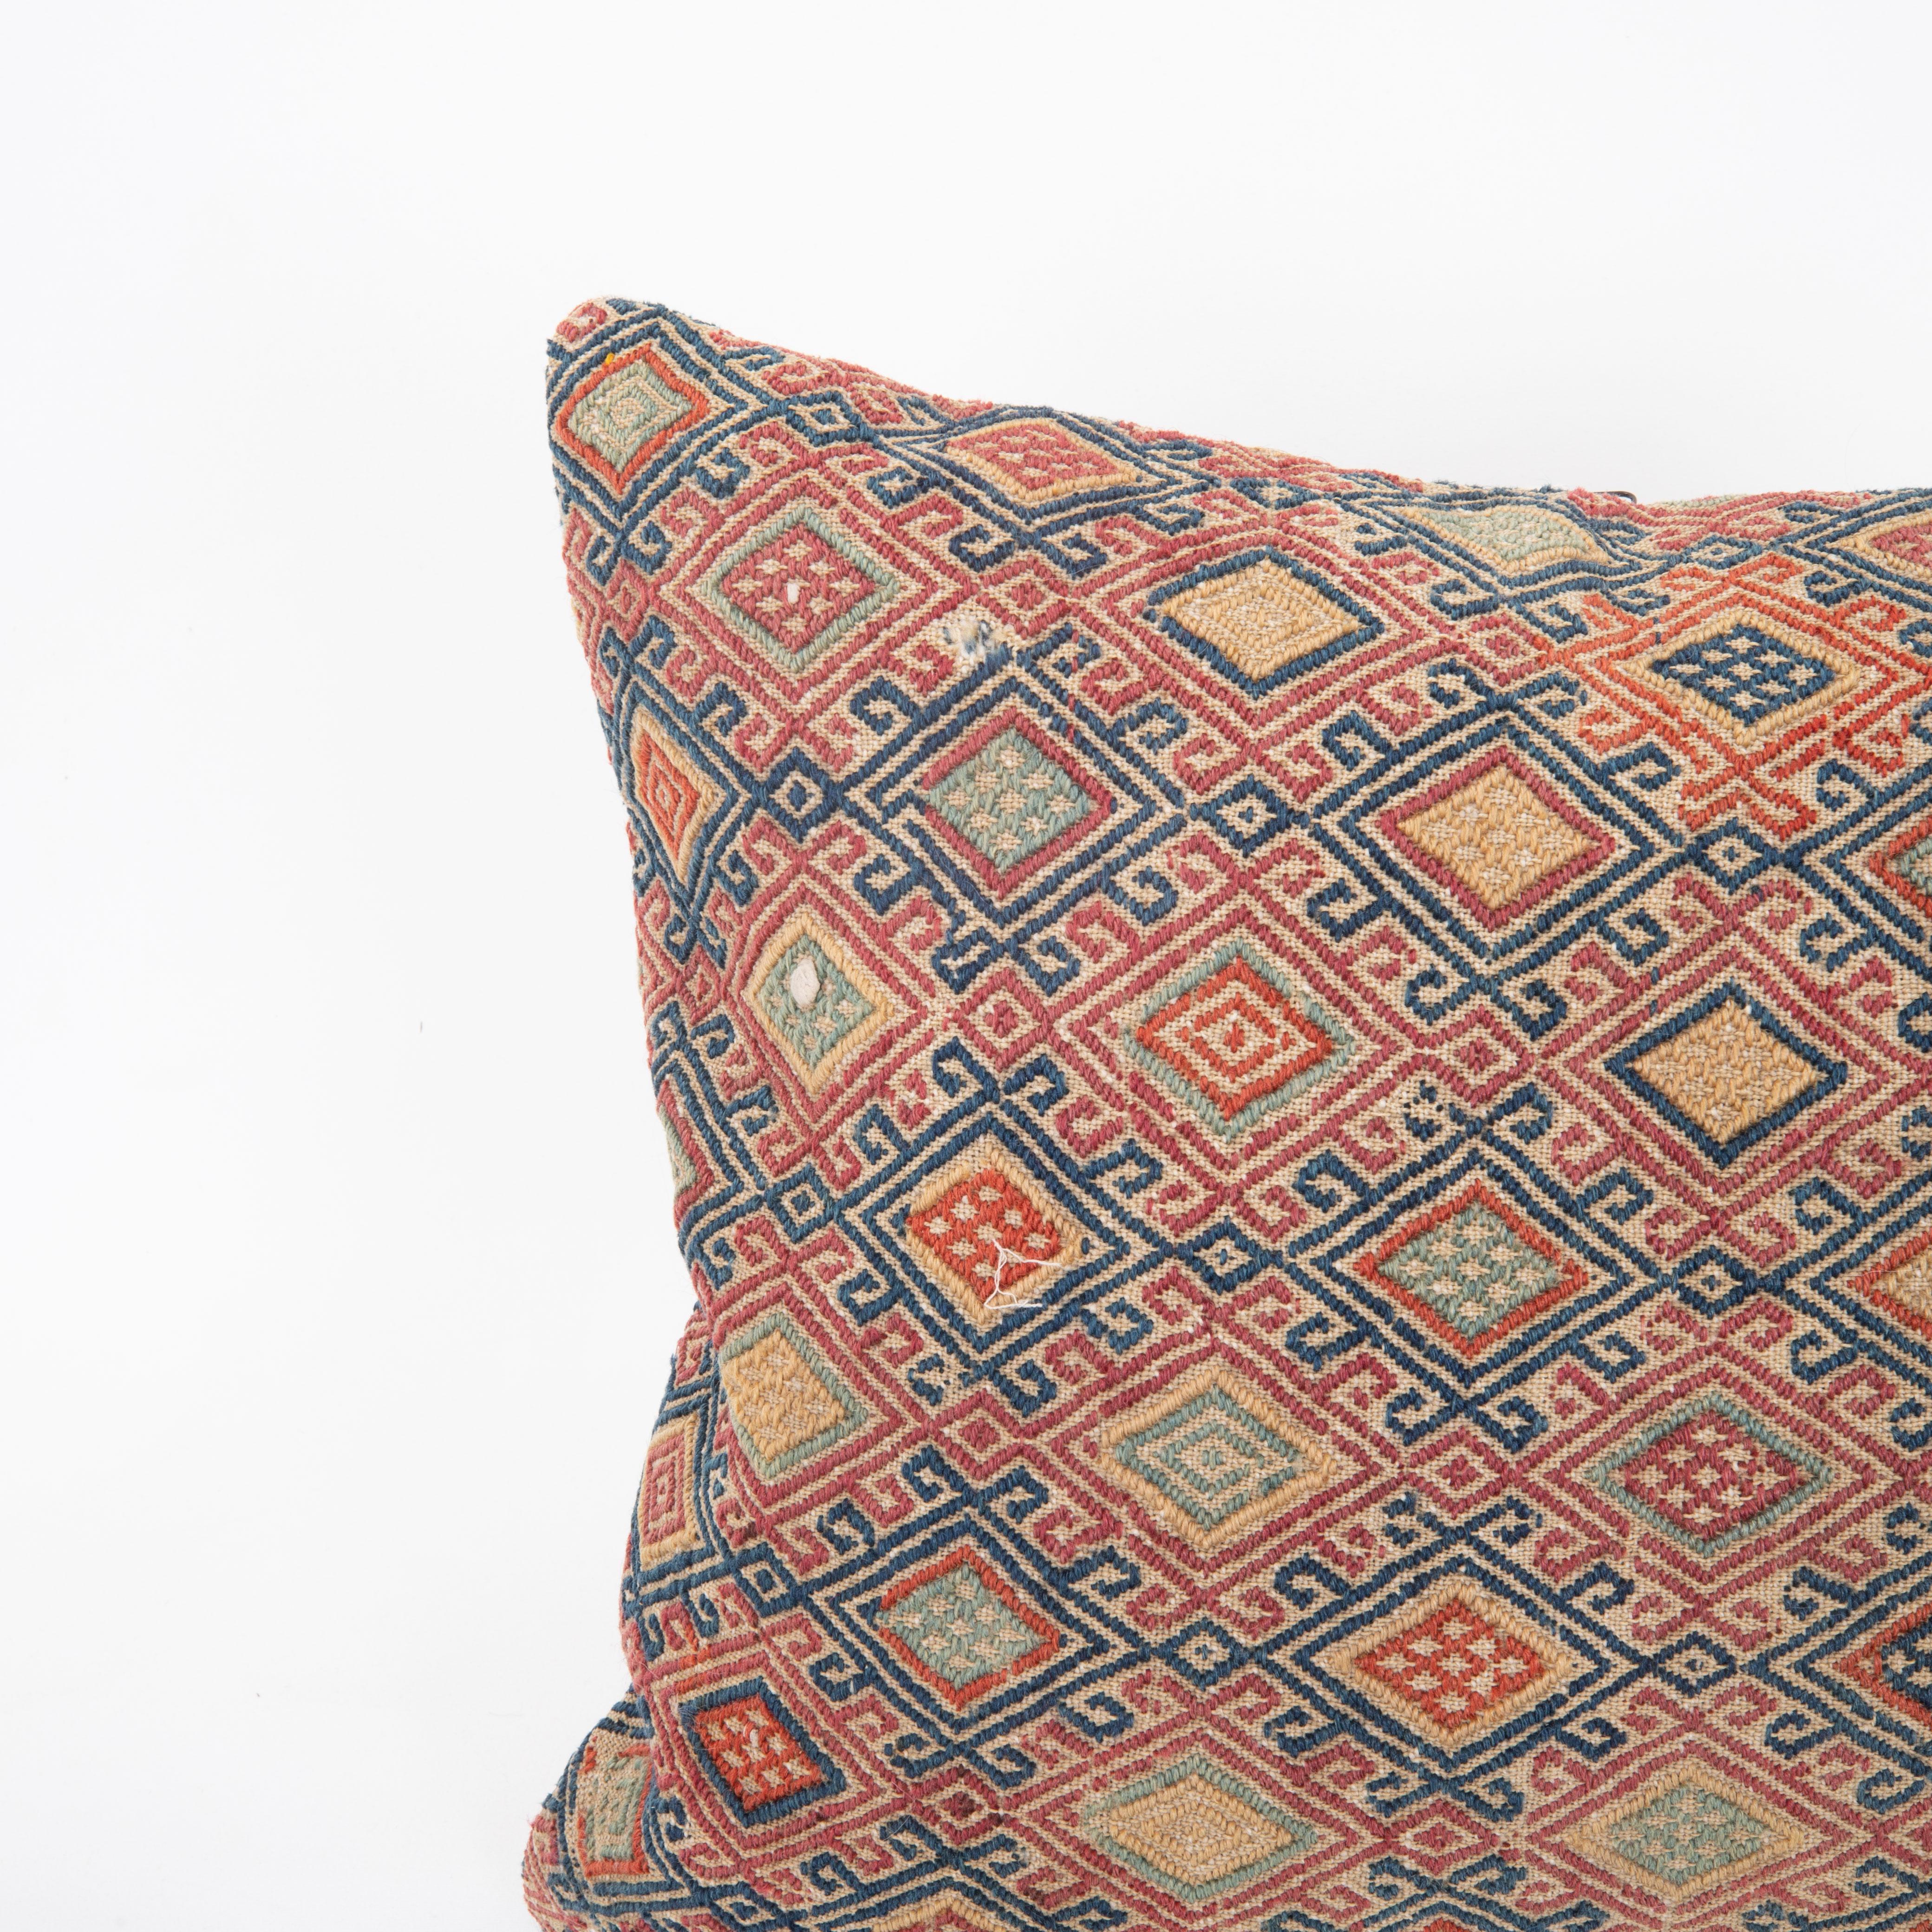 Kilim Pillow Cover Fashioned from an Antique Anatolian Cicim Bag Face